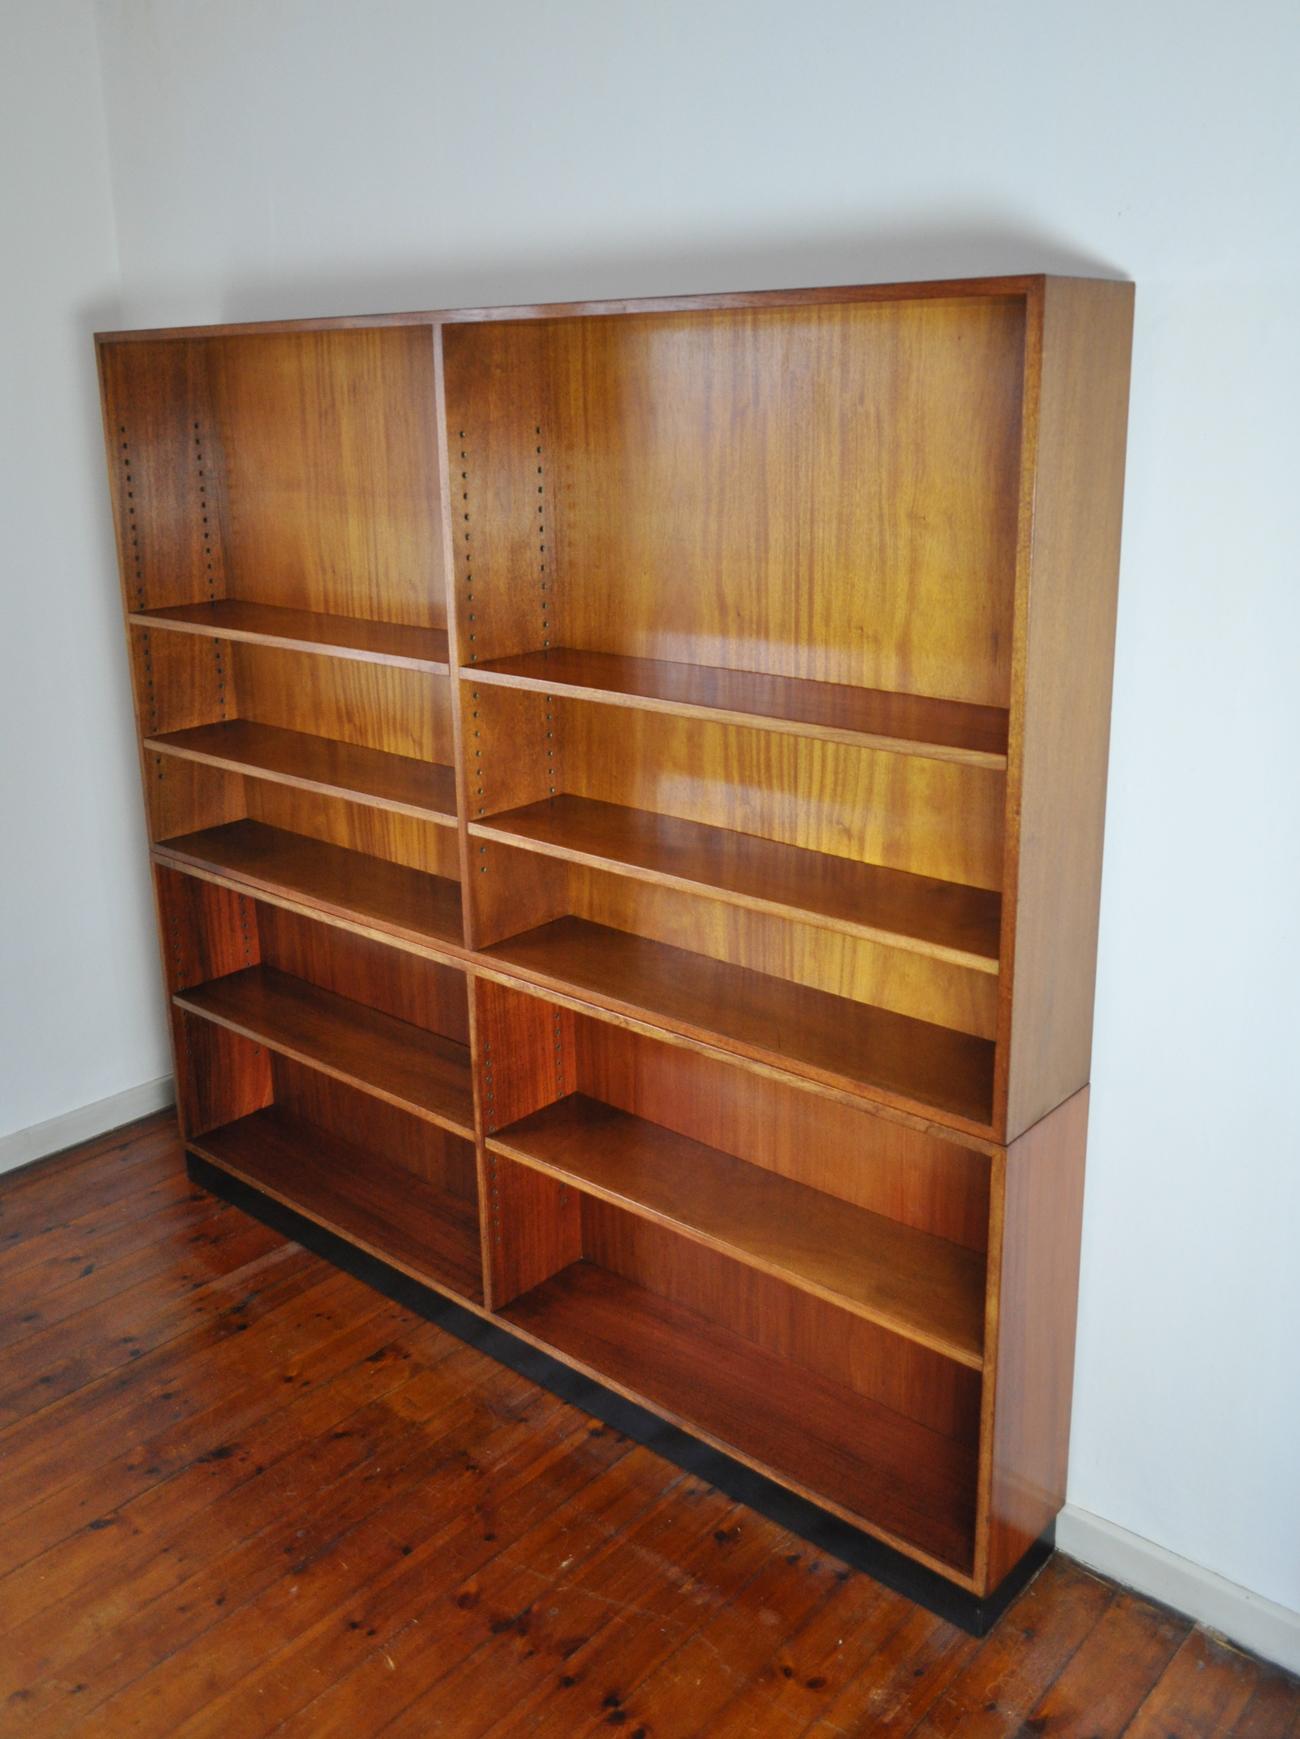 Scandinavian Modern Rud. Rasmussen Bookcase in Two Sections Made of Solid Mahogany